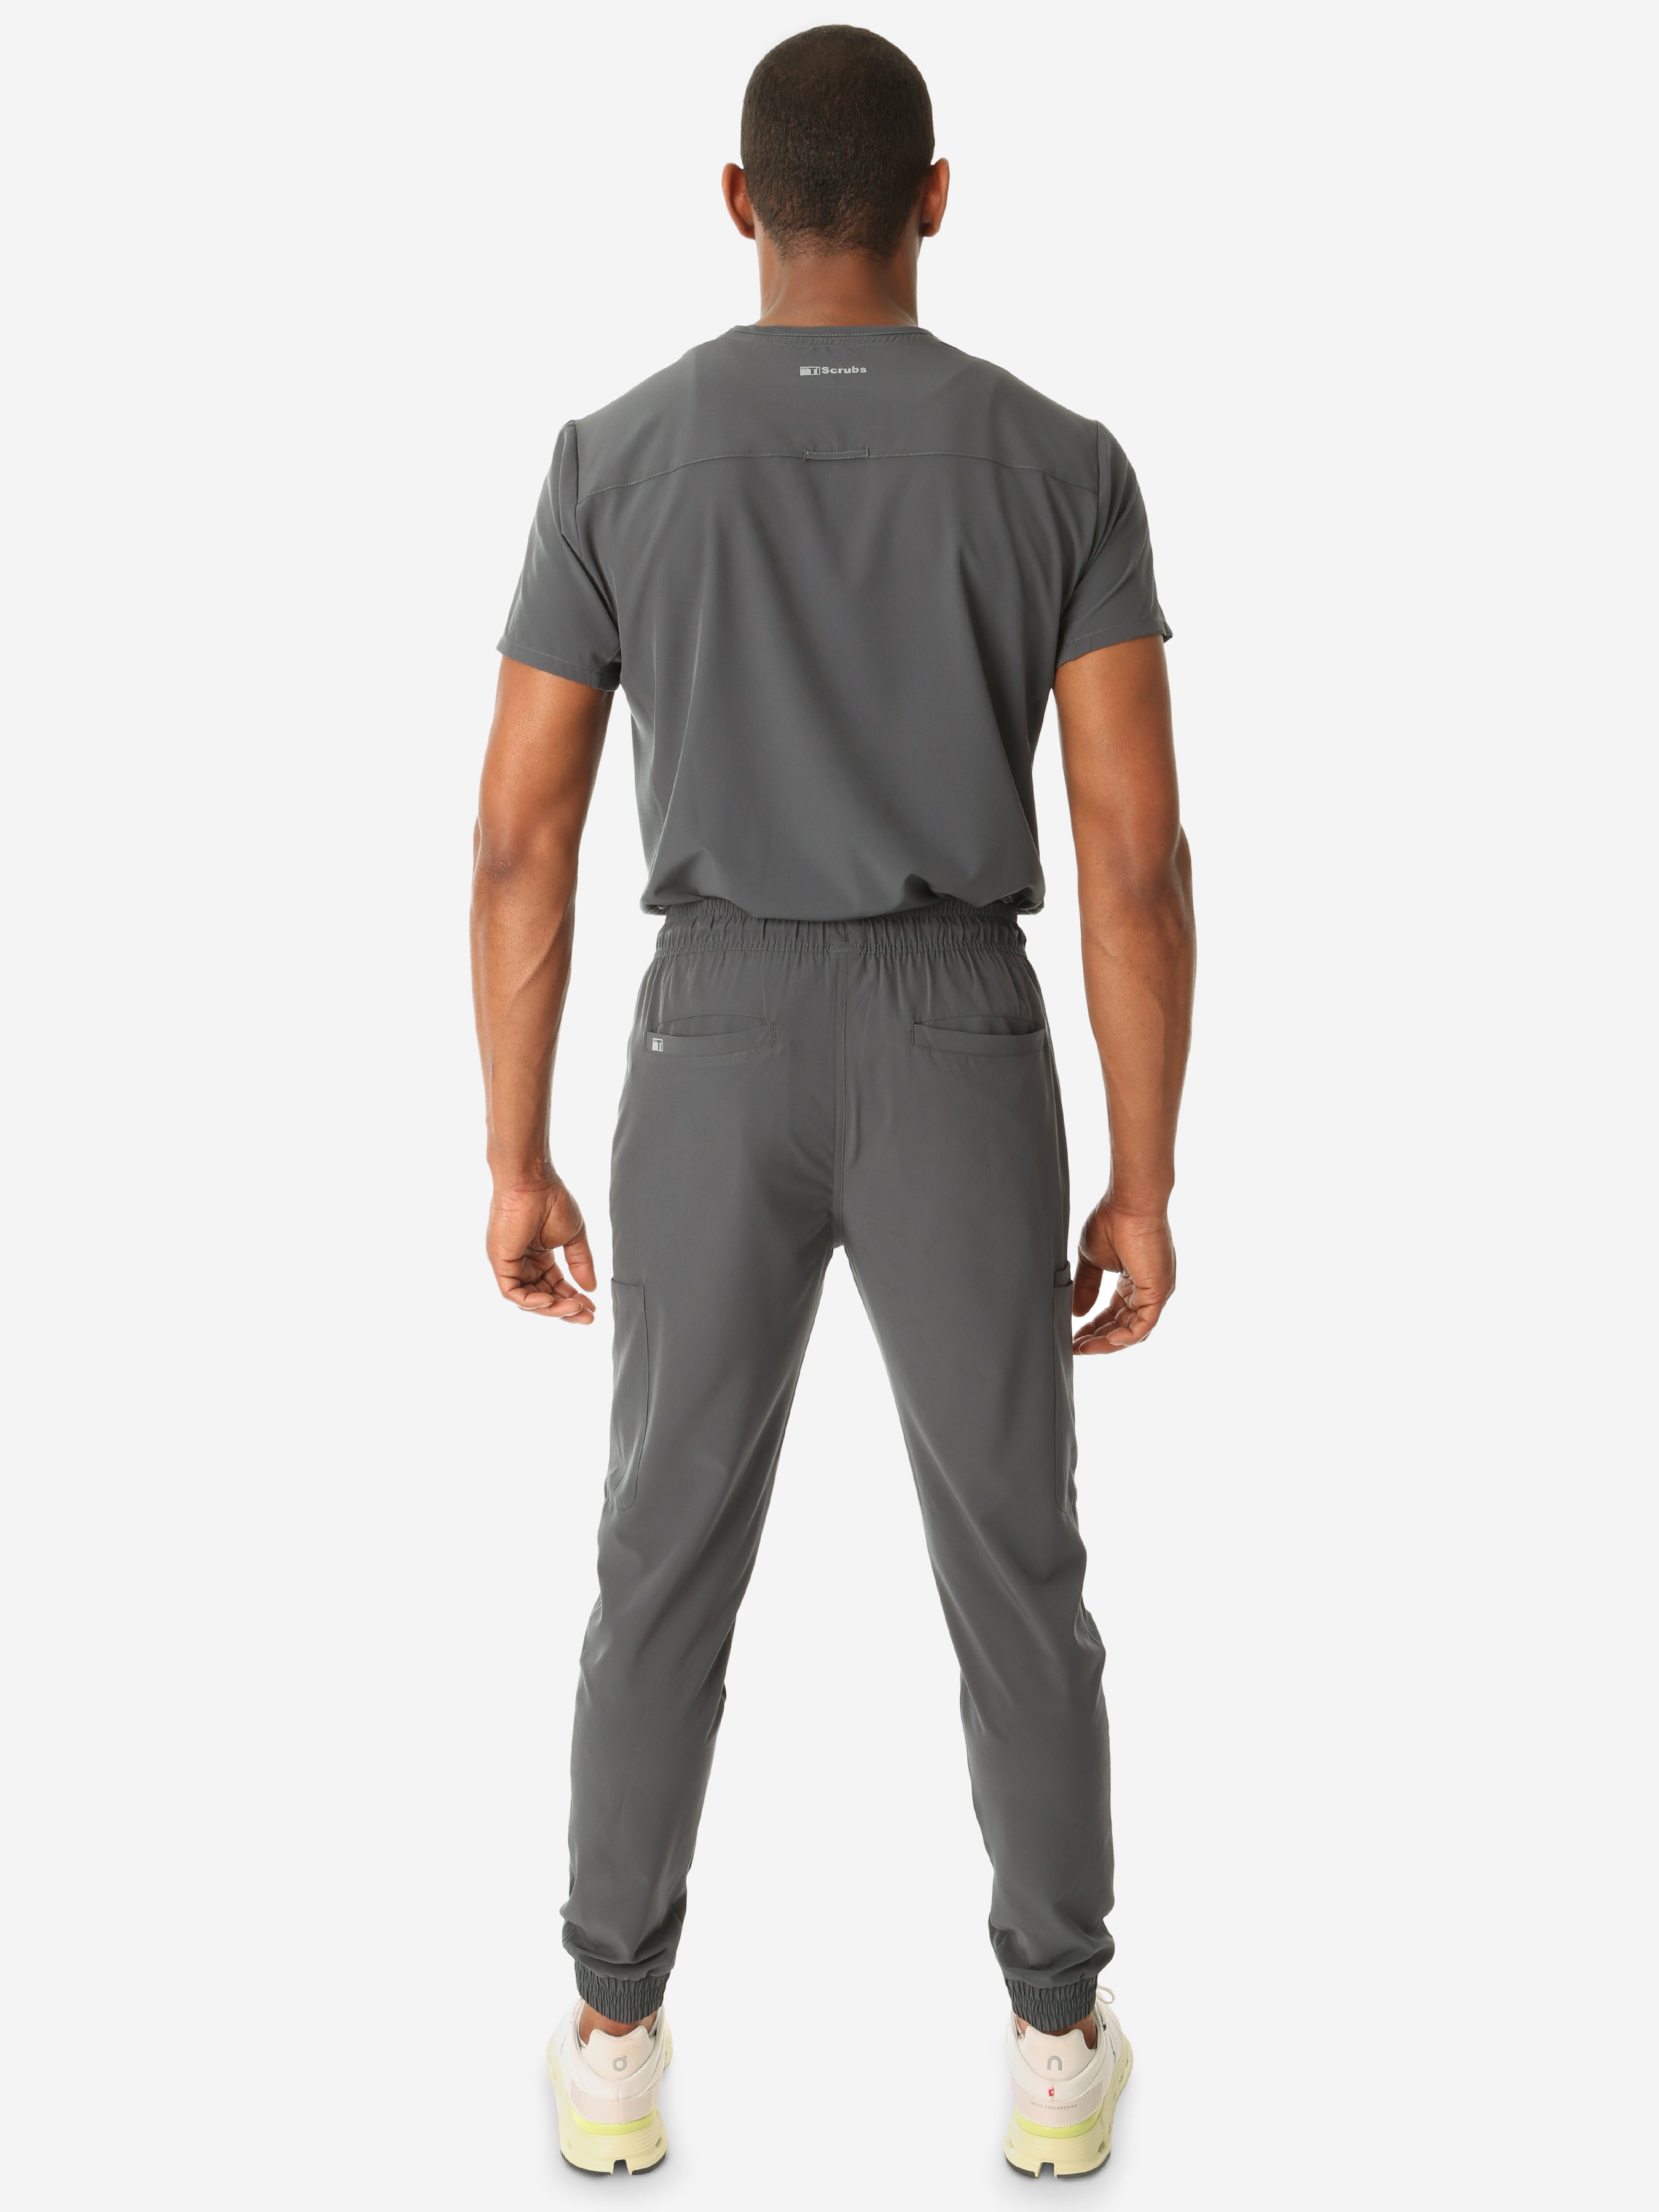 TiScrubs Stretch Charcoal Gray Men's Jogger Scrub Pants and Double Pocket Top Tucked Full Body Back